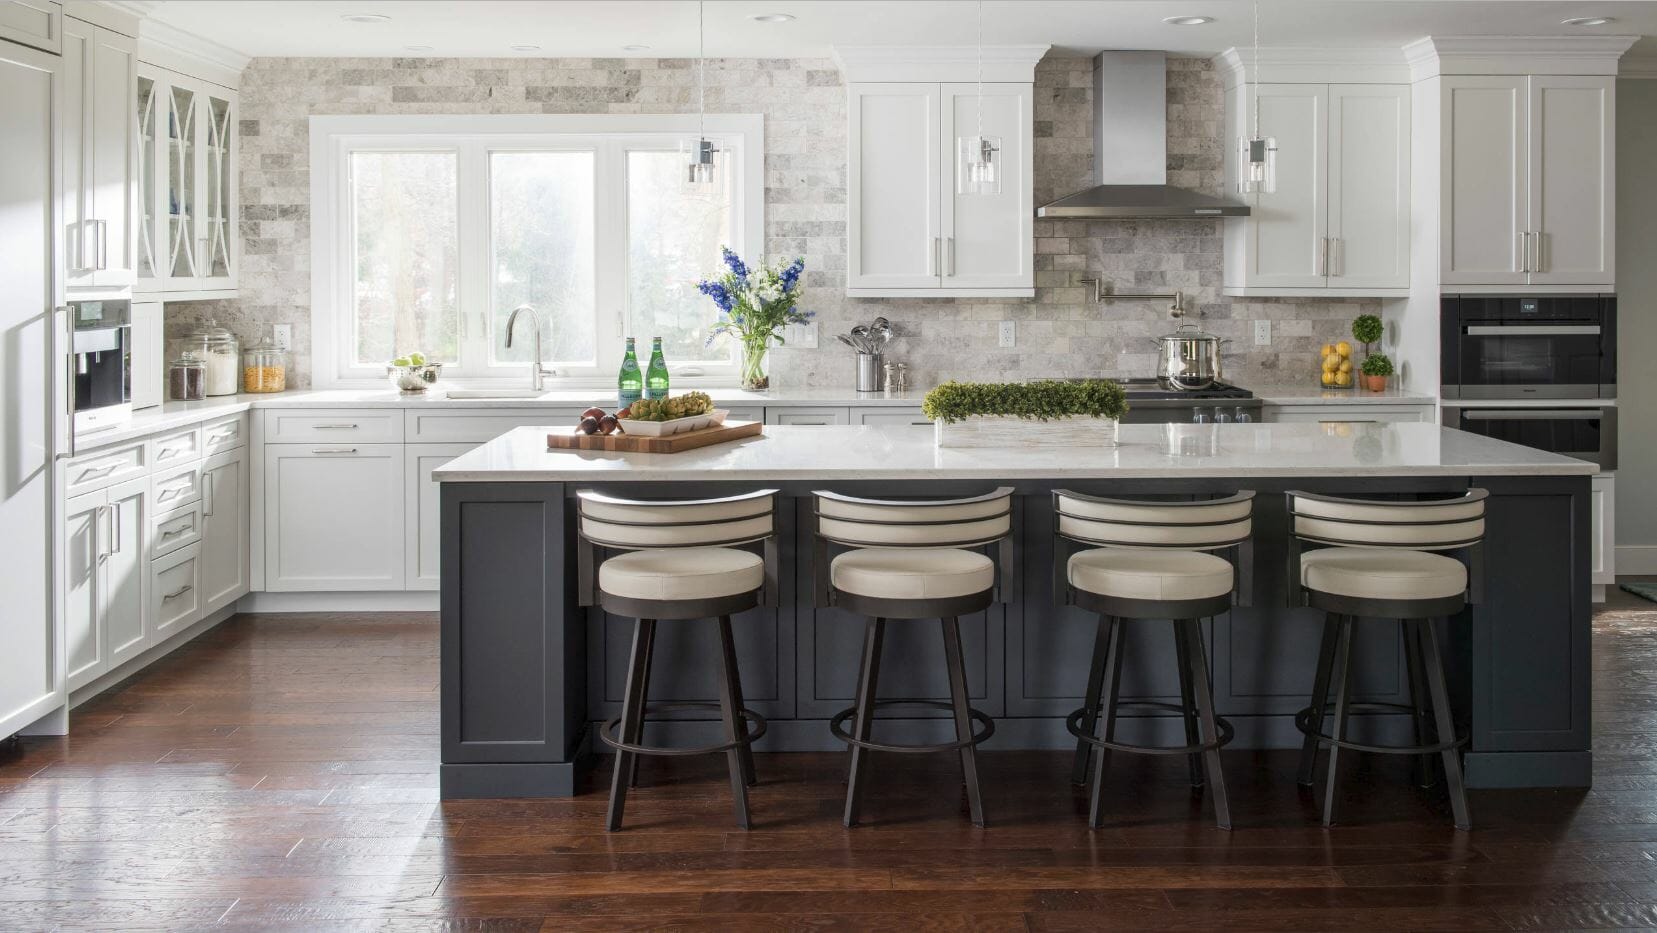 A kitchen trend designers love and families need